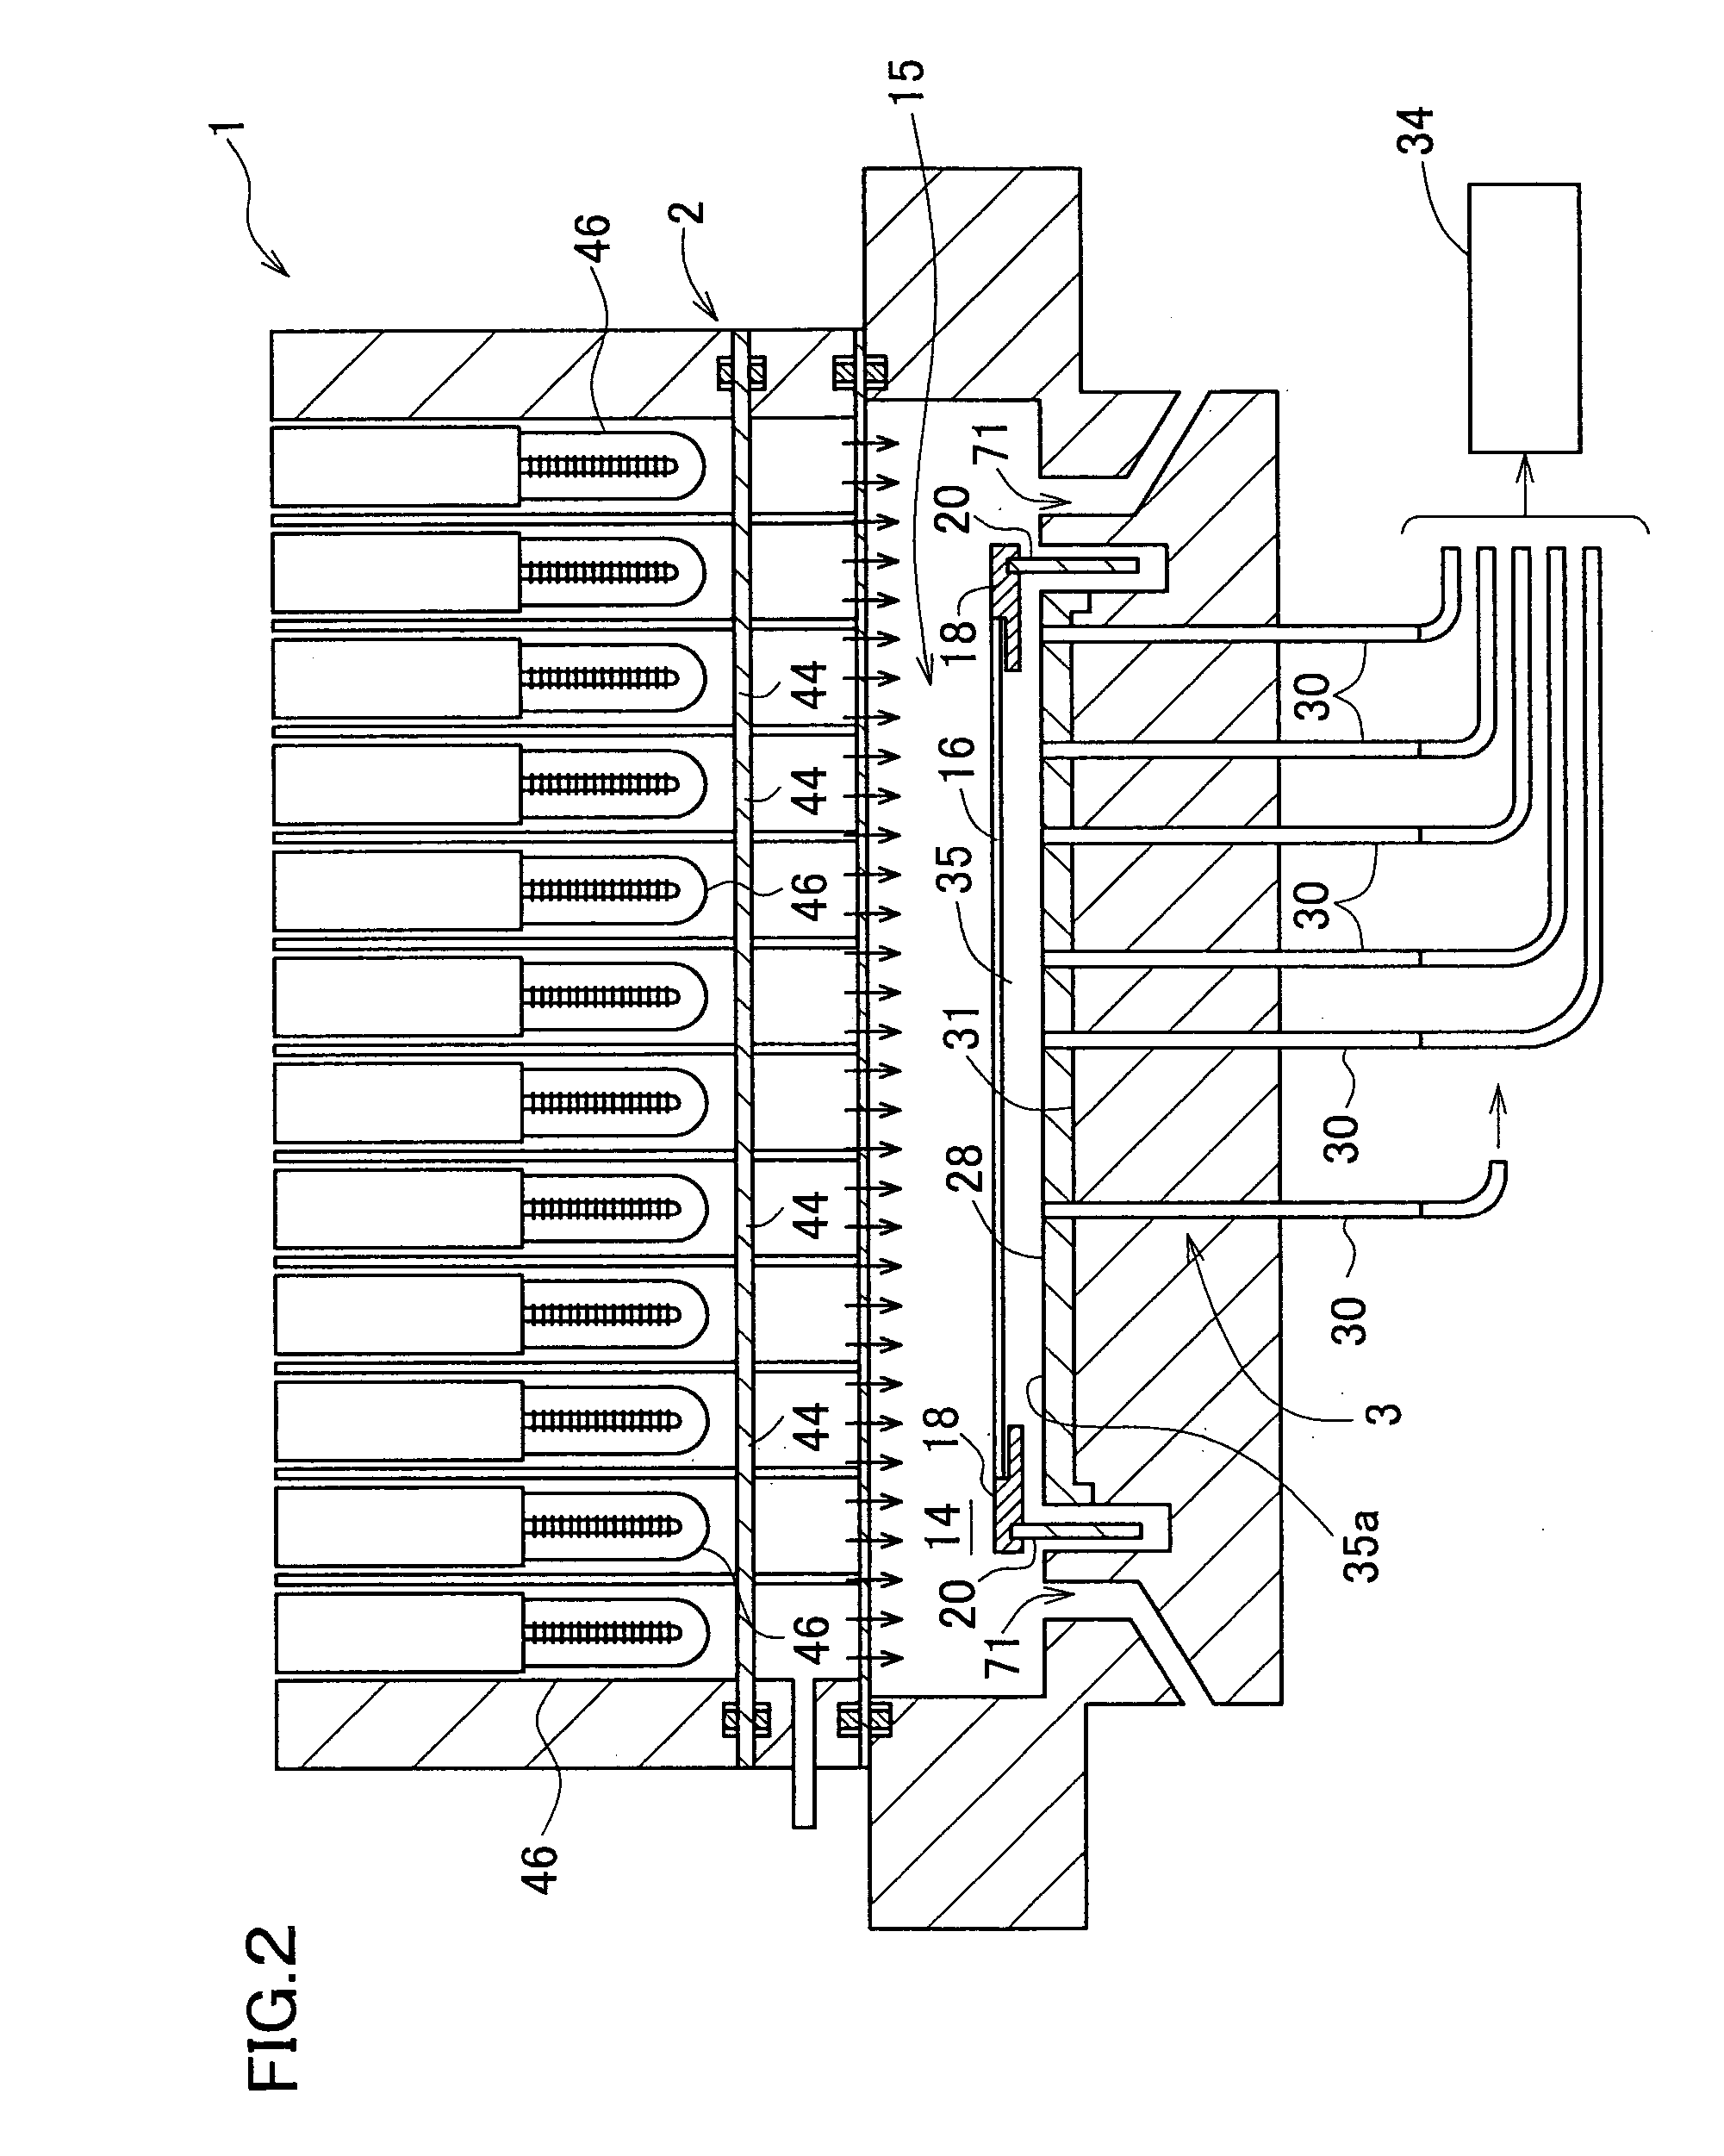 Temperature measuring system, heating device using it and production method for semiconductor wafer, heat ray insulating translucent member, visible light reflection membner, exposure system-use reflection mirror and exposure system, and semiconductor device produced by using them and vetical heat treating device